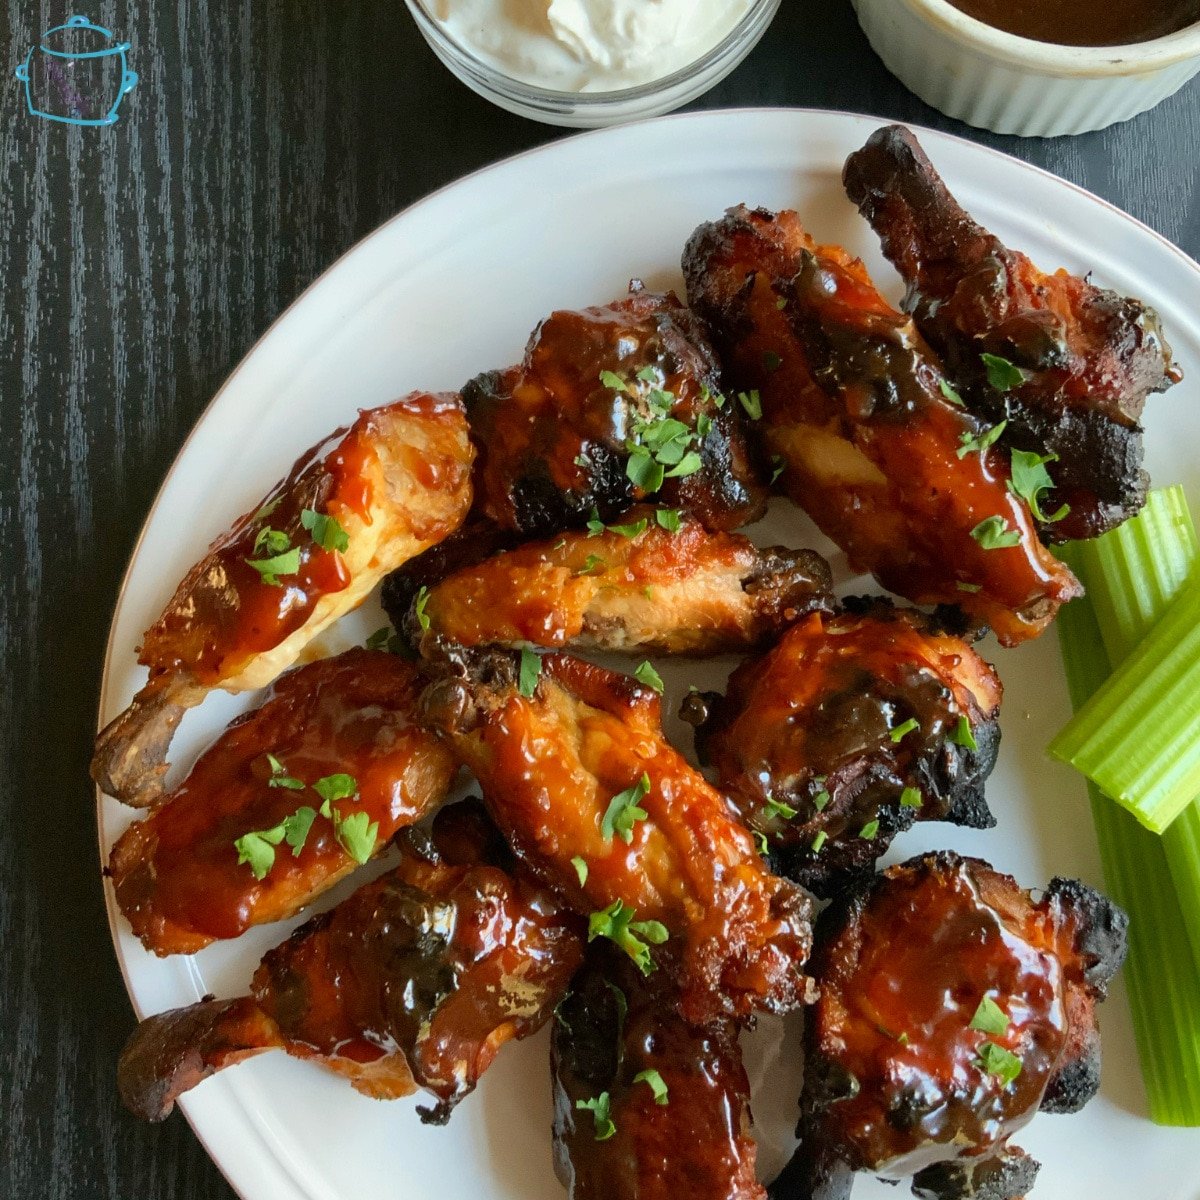 a white plate containing crispy and sticky looking wings with some fresh celery off to the side.  